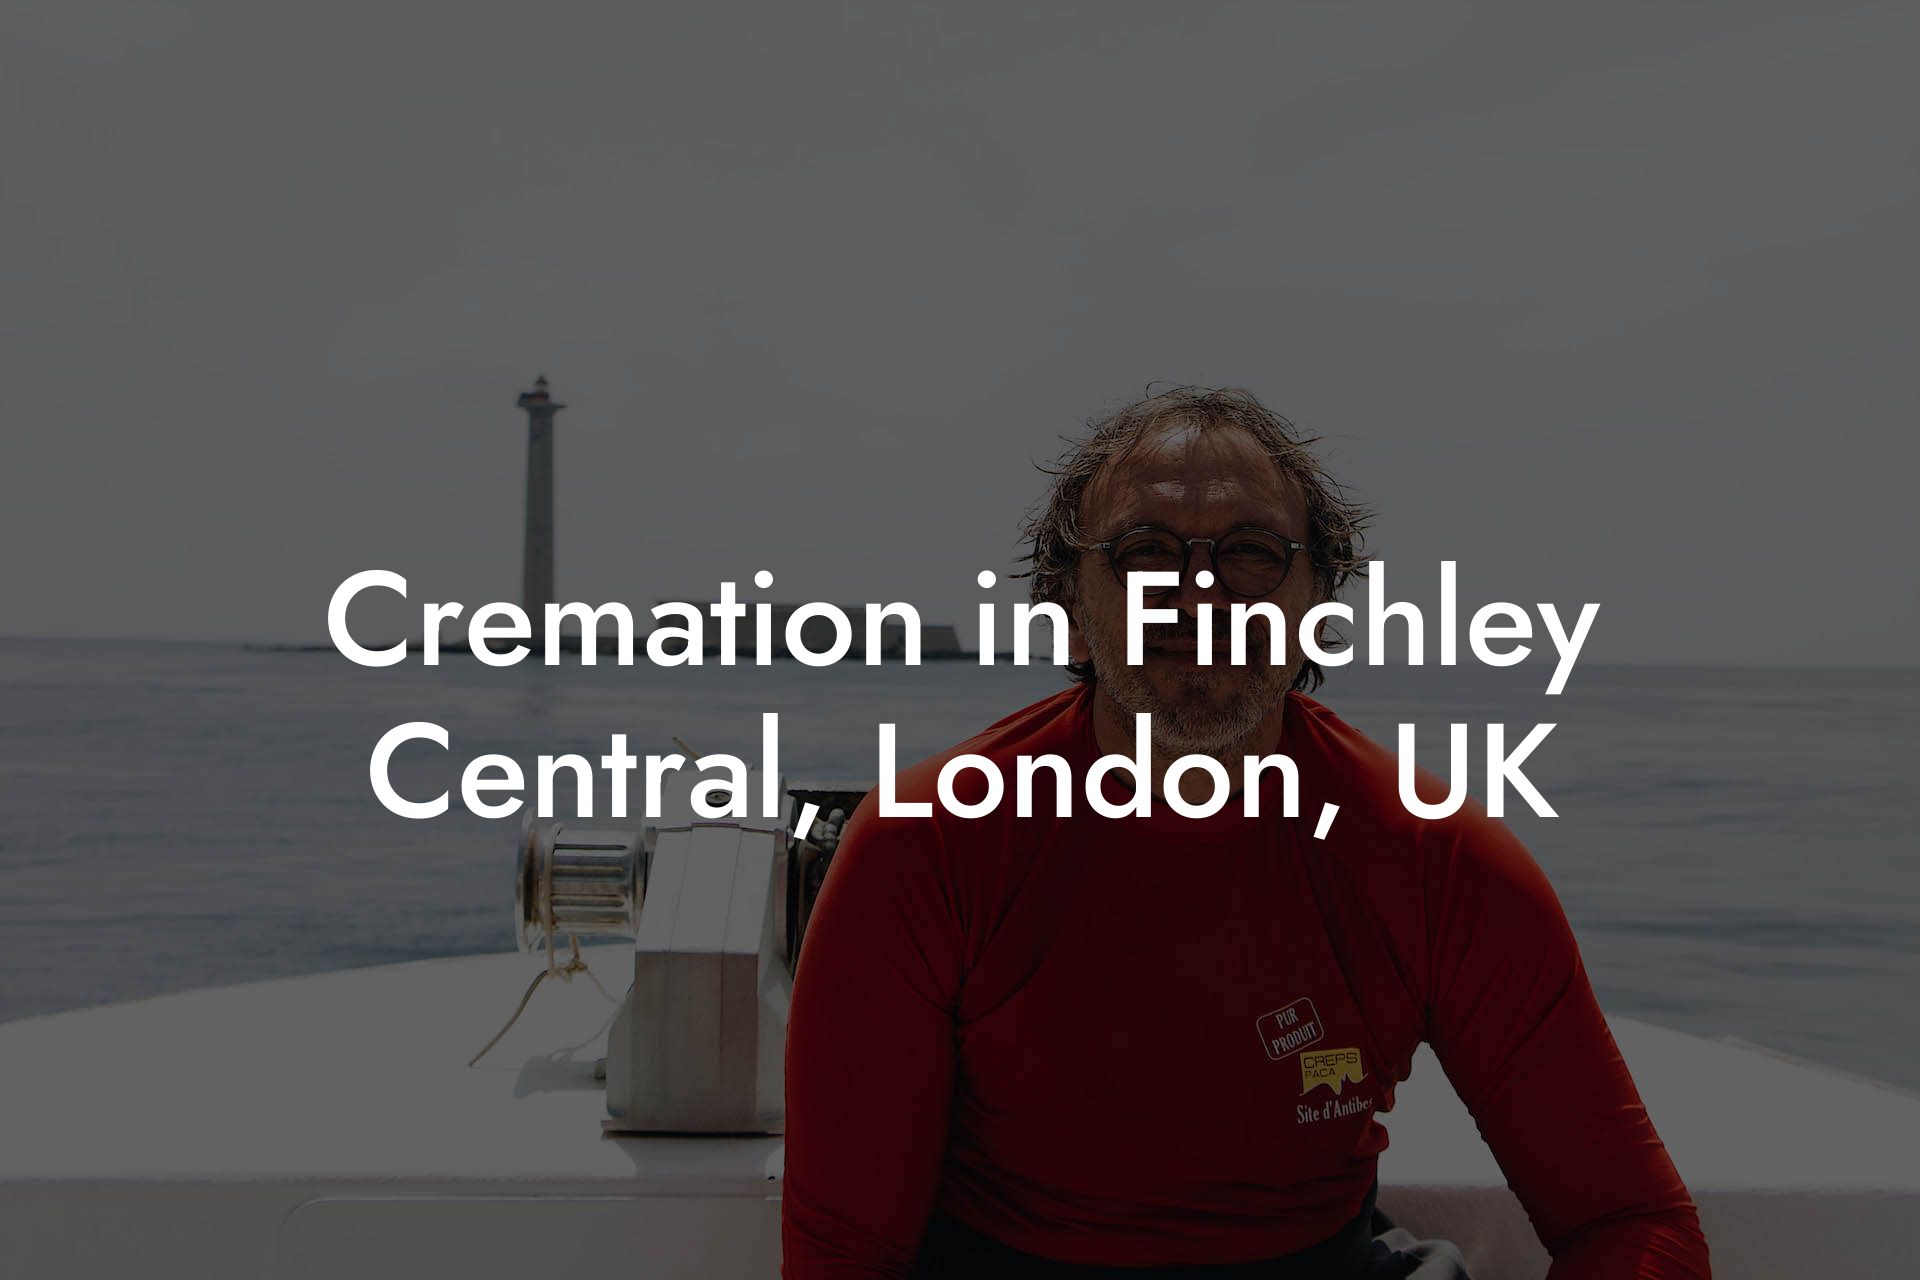 Cremation in Finchley Central, London, UK